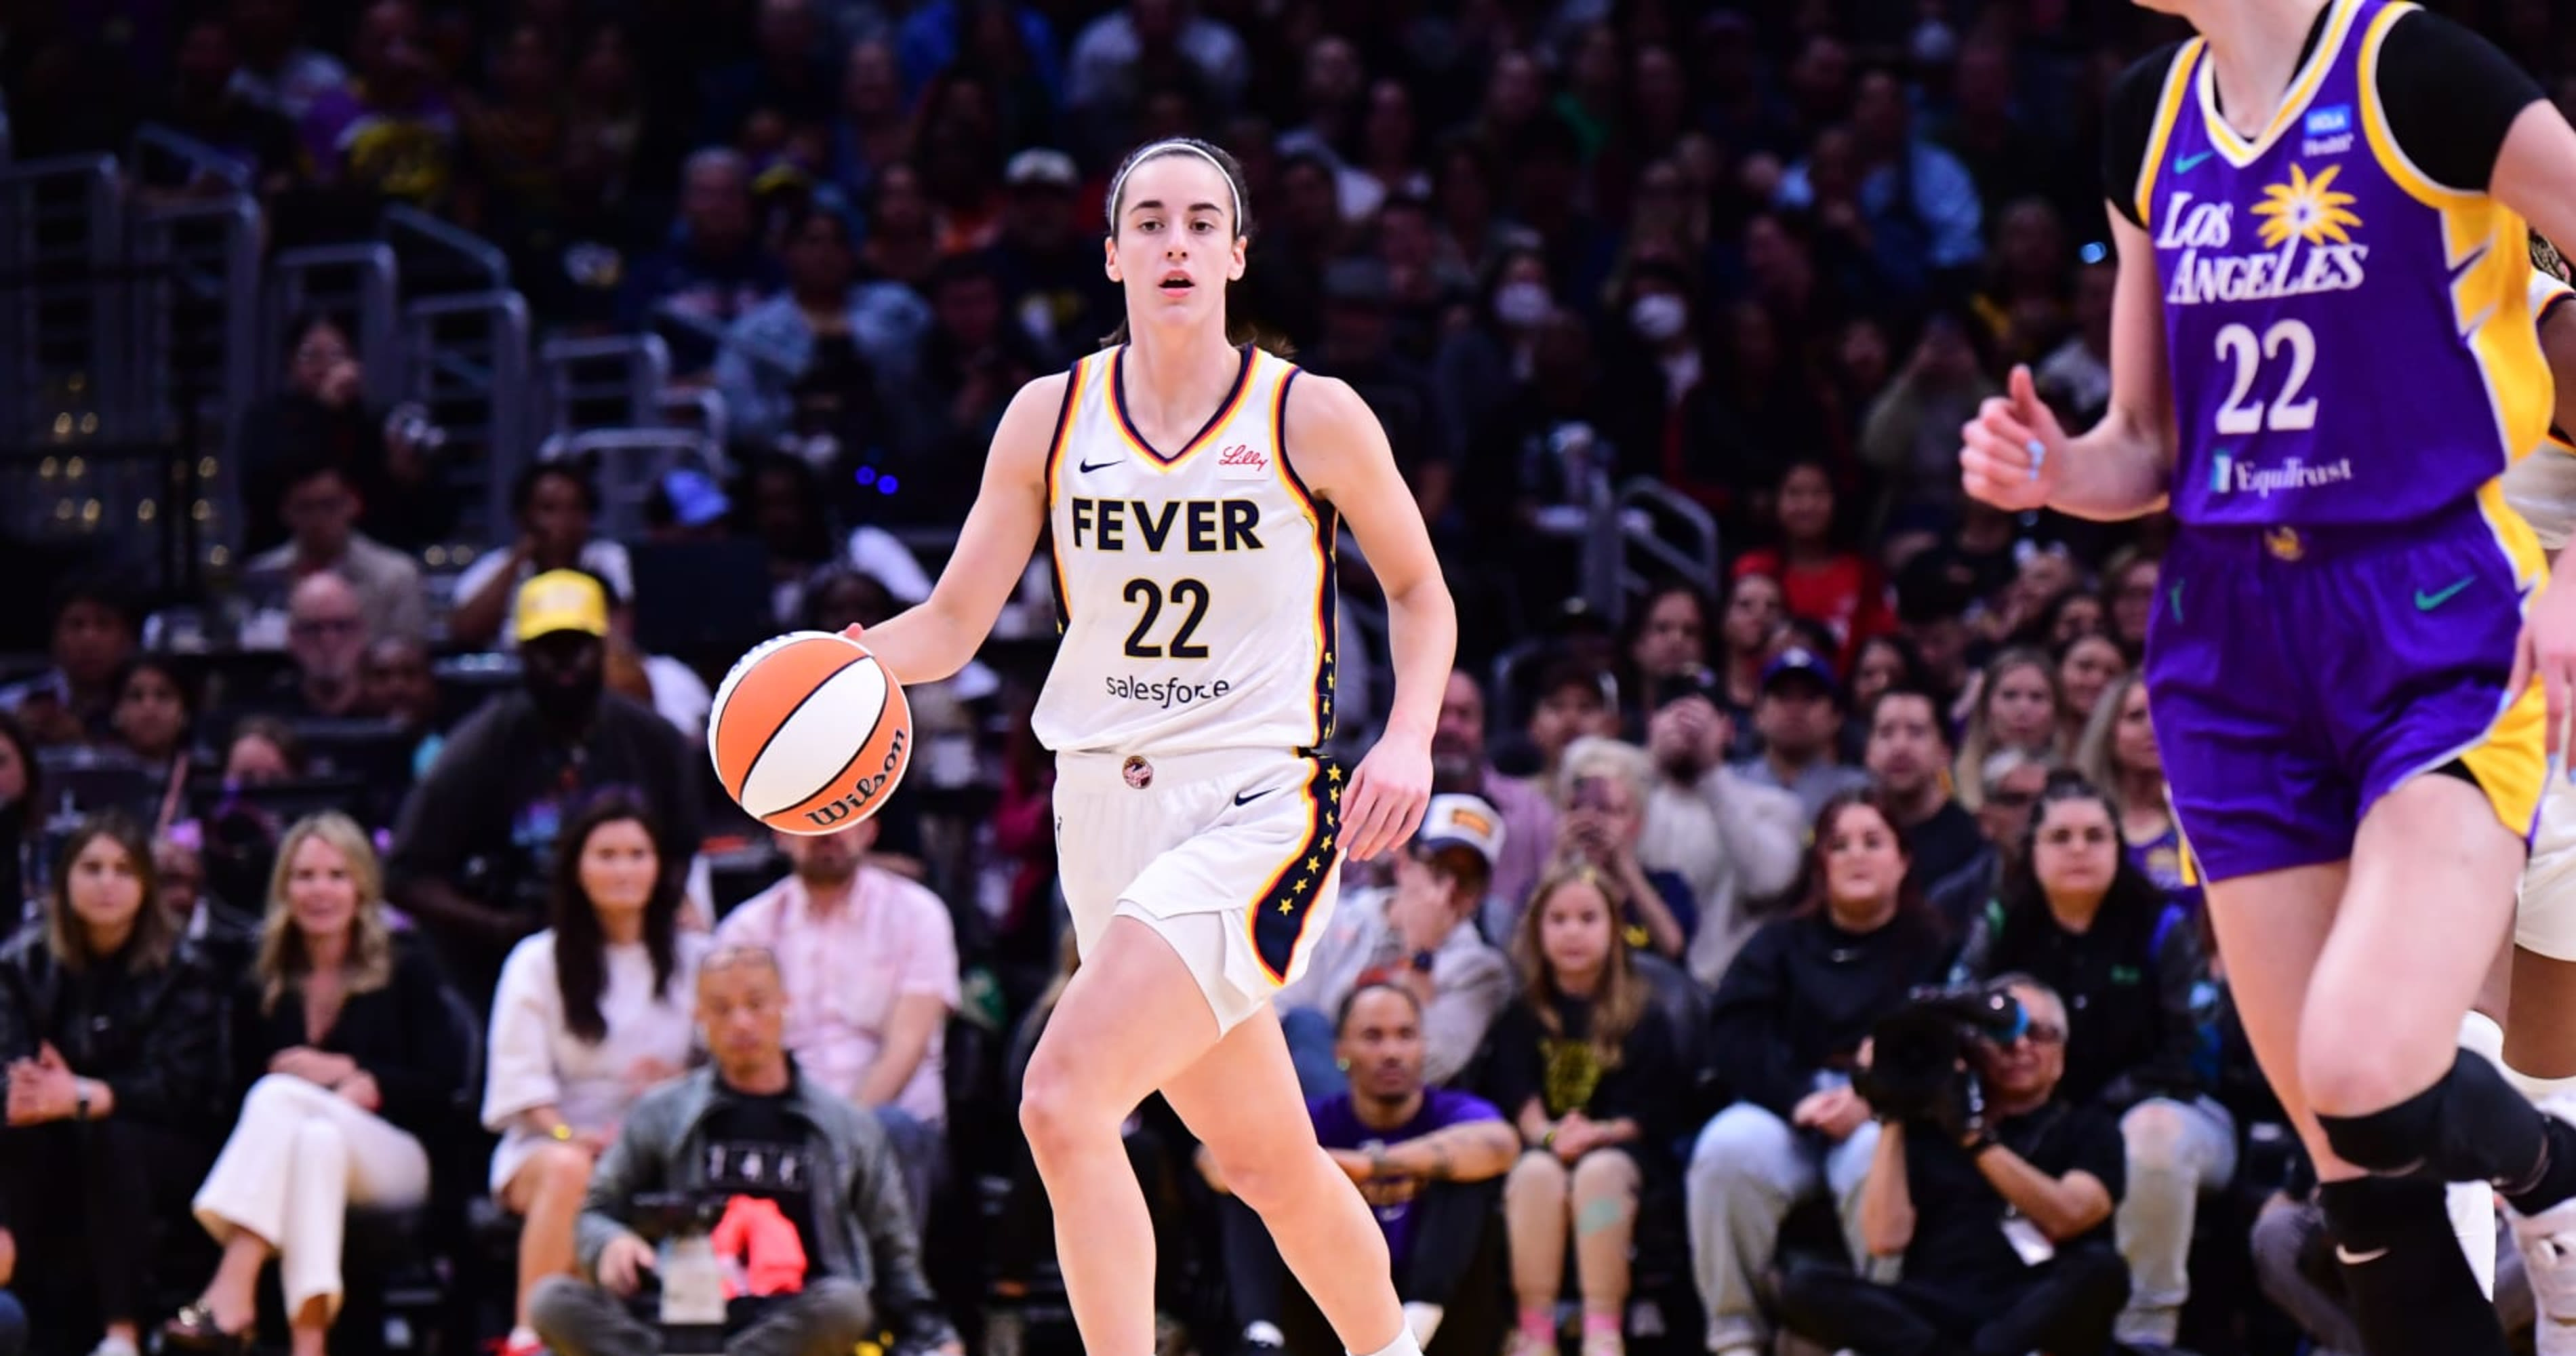 Caitlin Clark's 1st Career WNBA Win Celebrated by Fans as Fever Beat Brink, Sparks